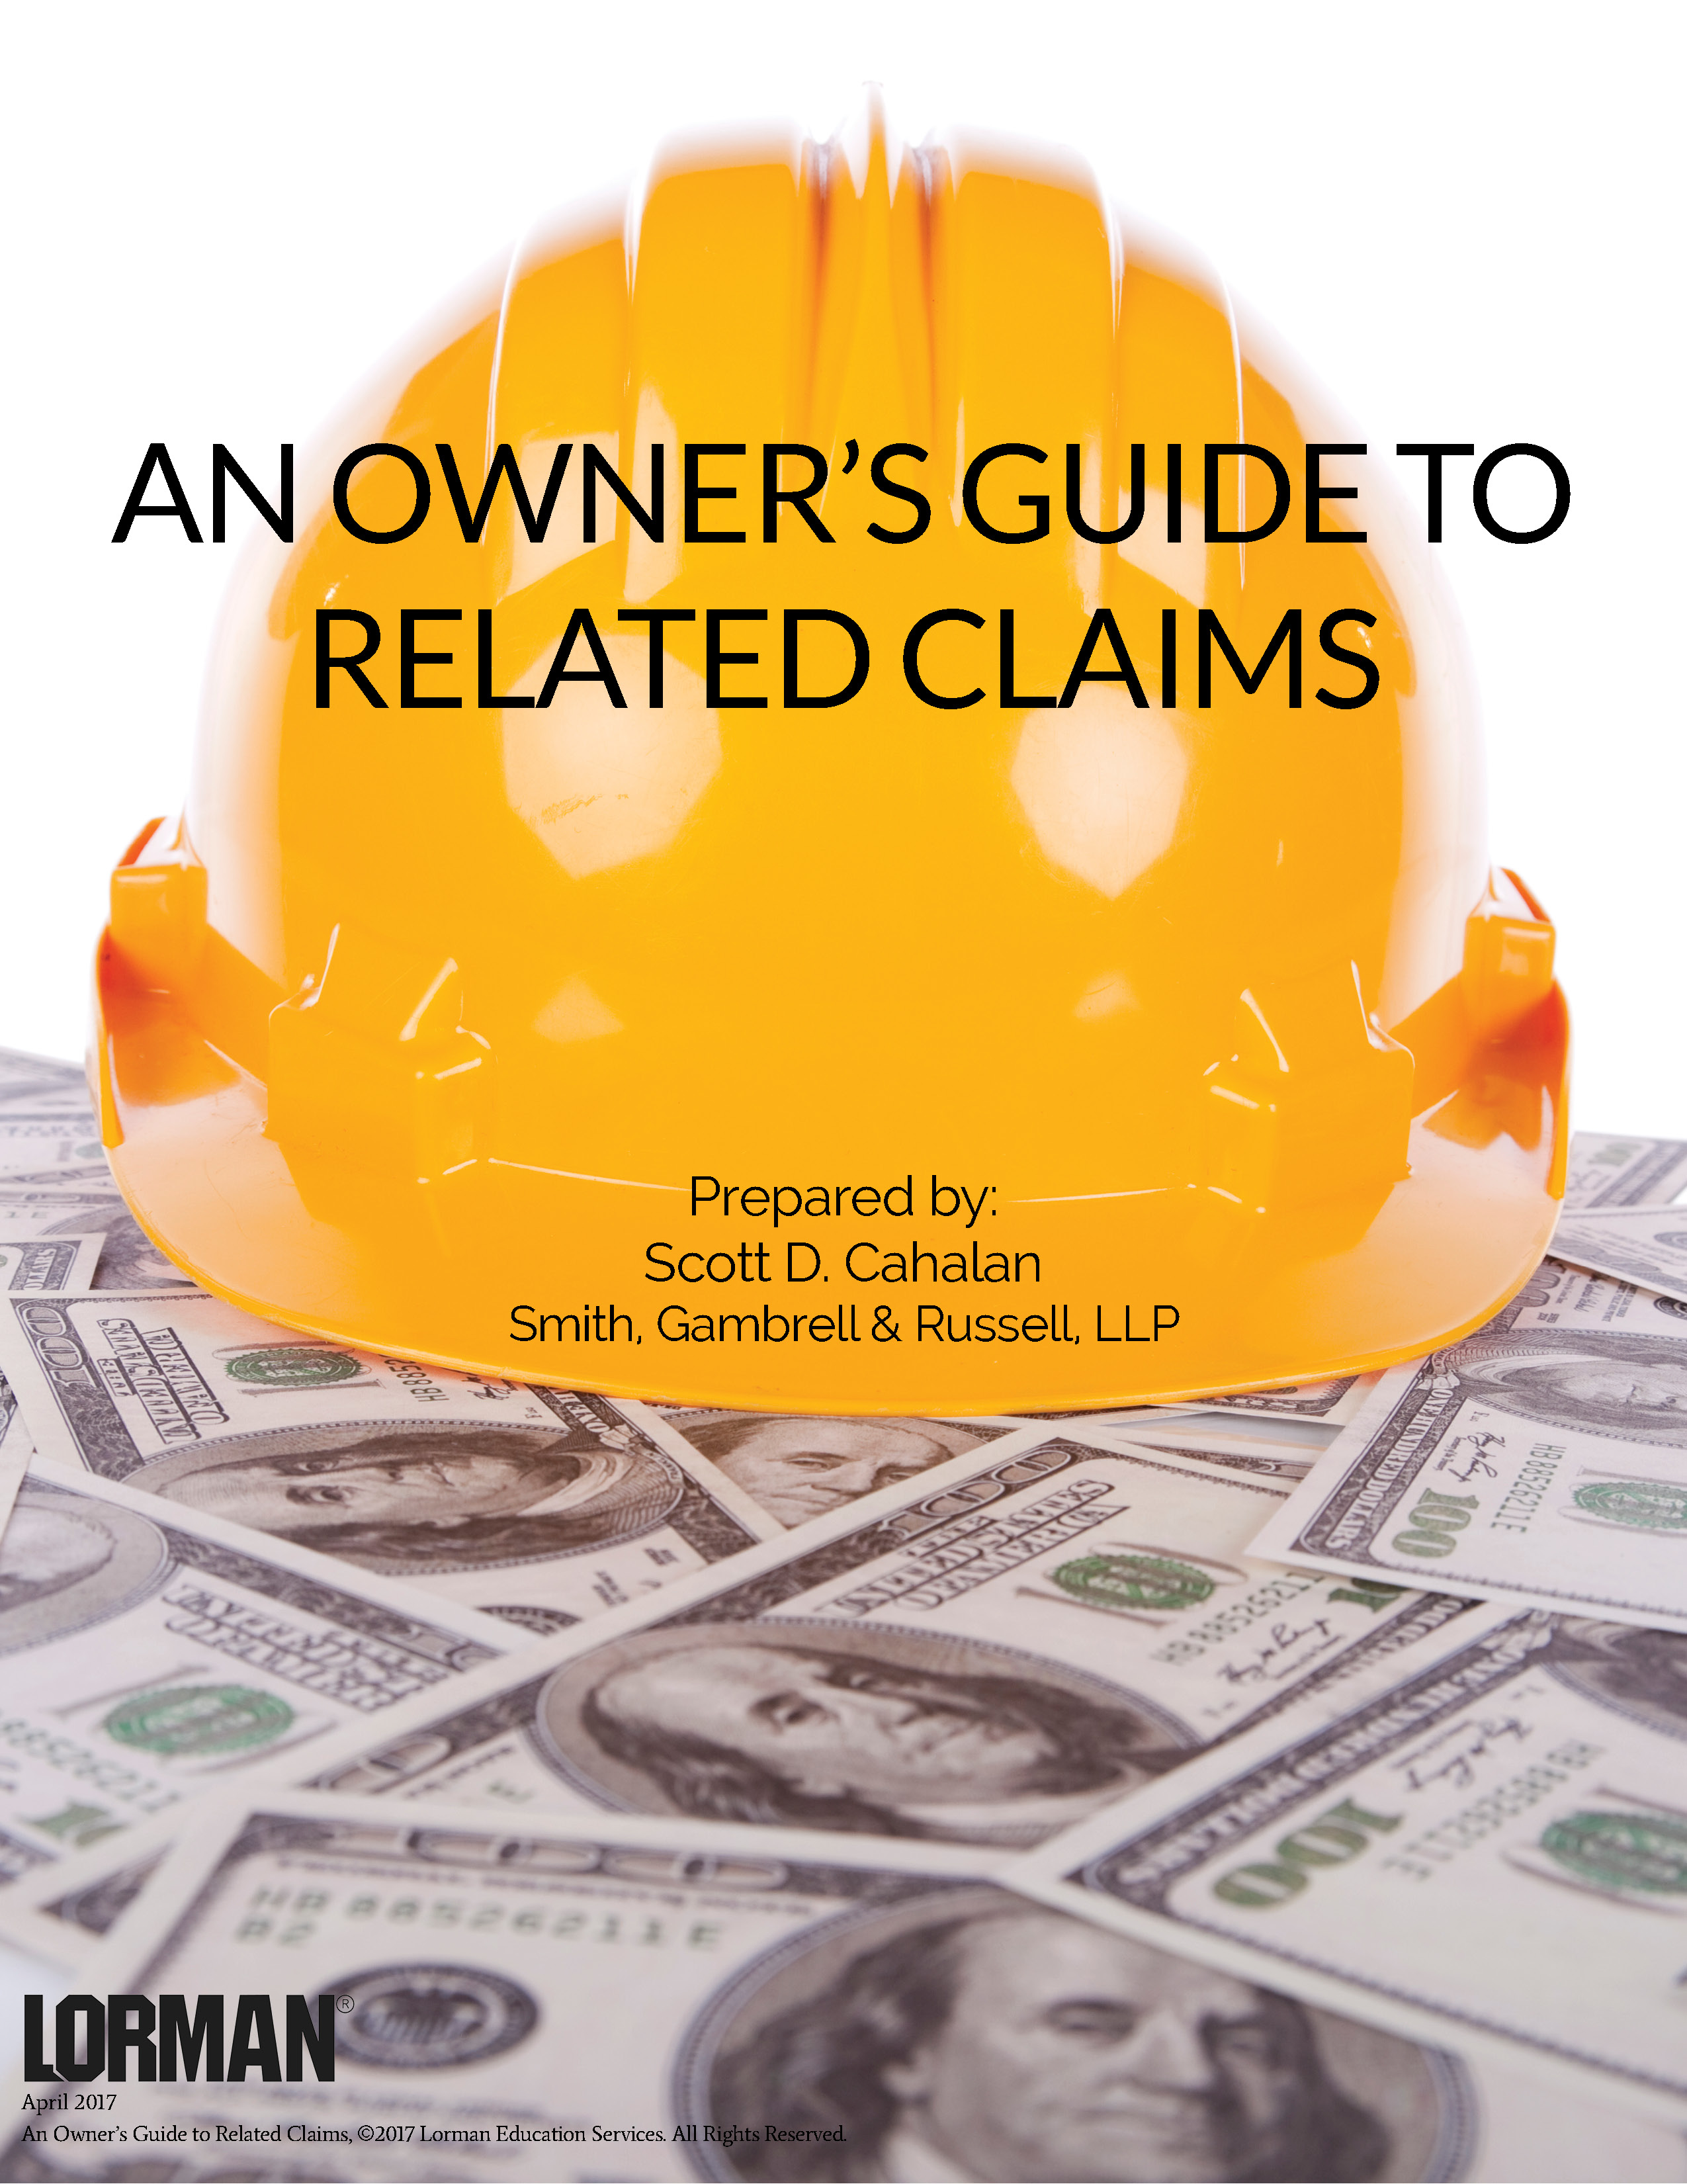 An Owner’s Guide to Related Claims